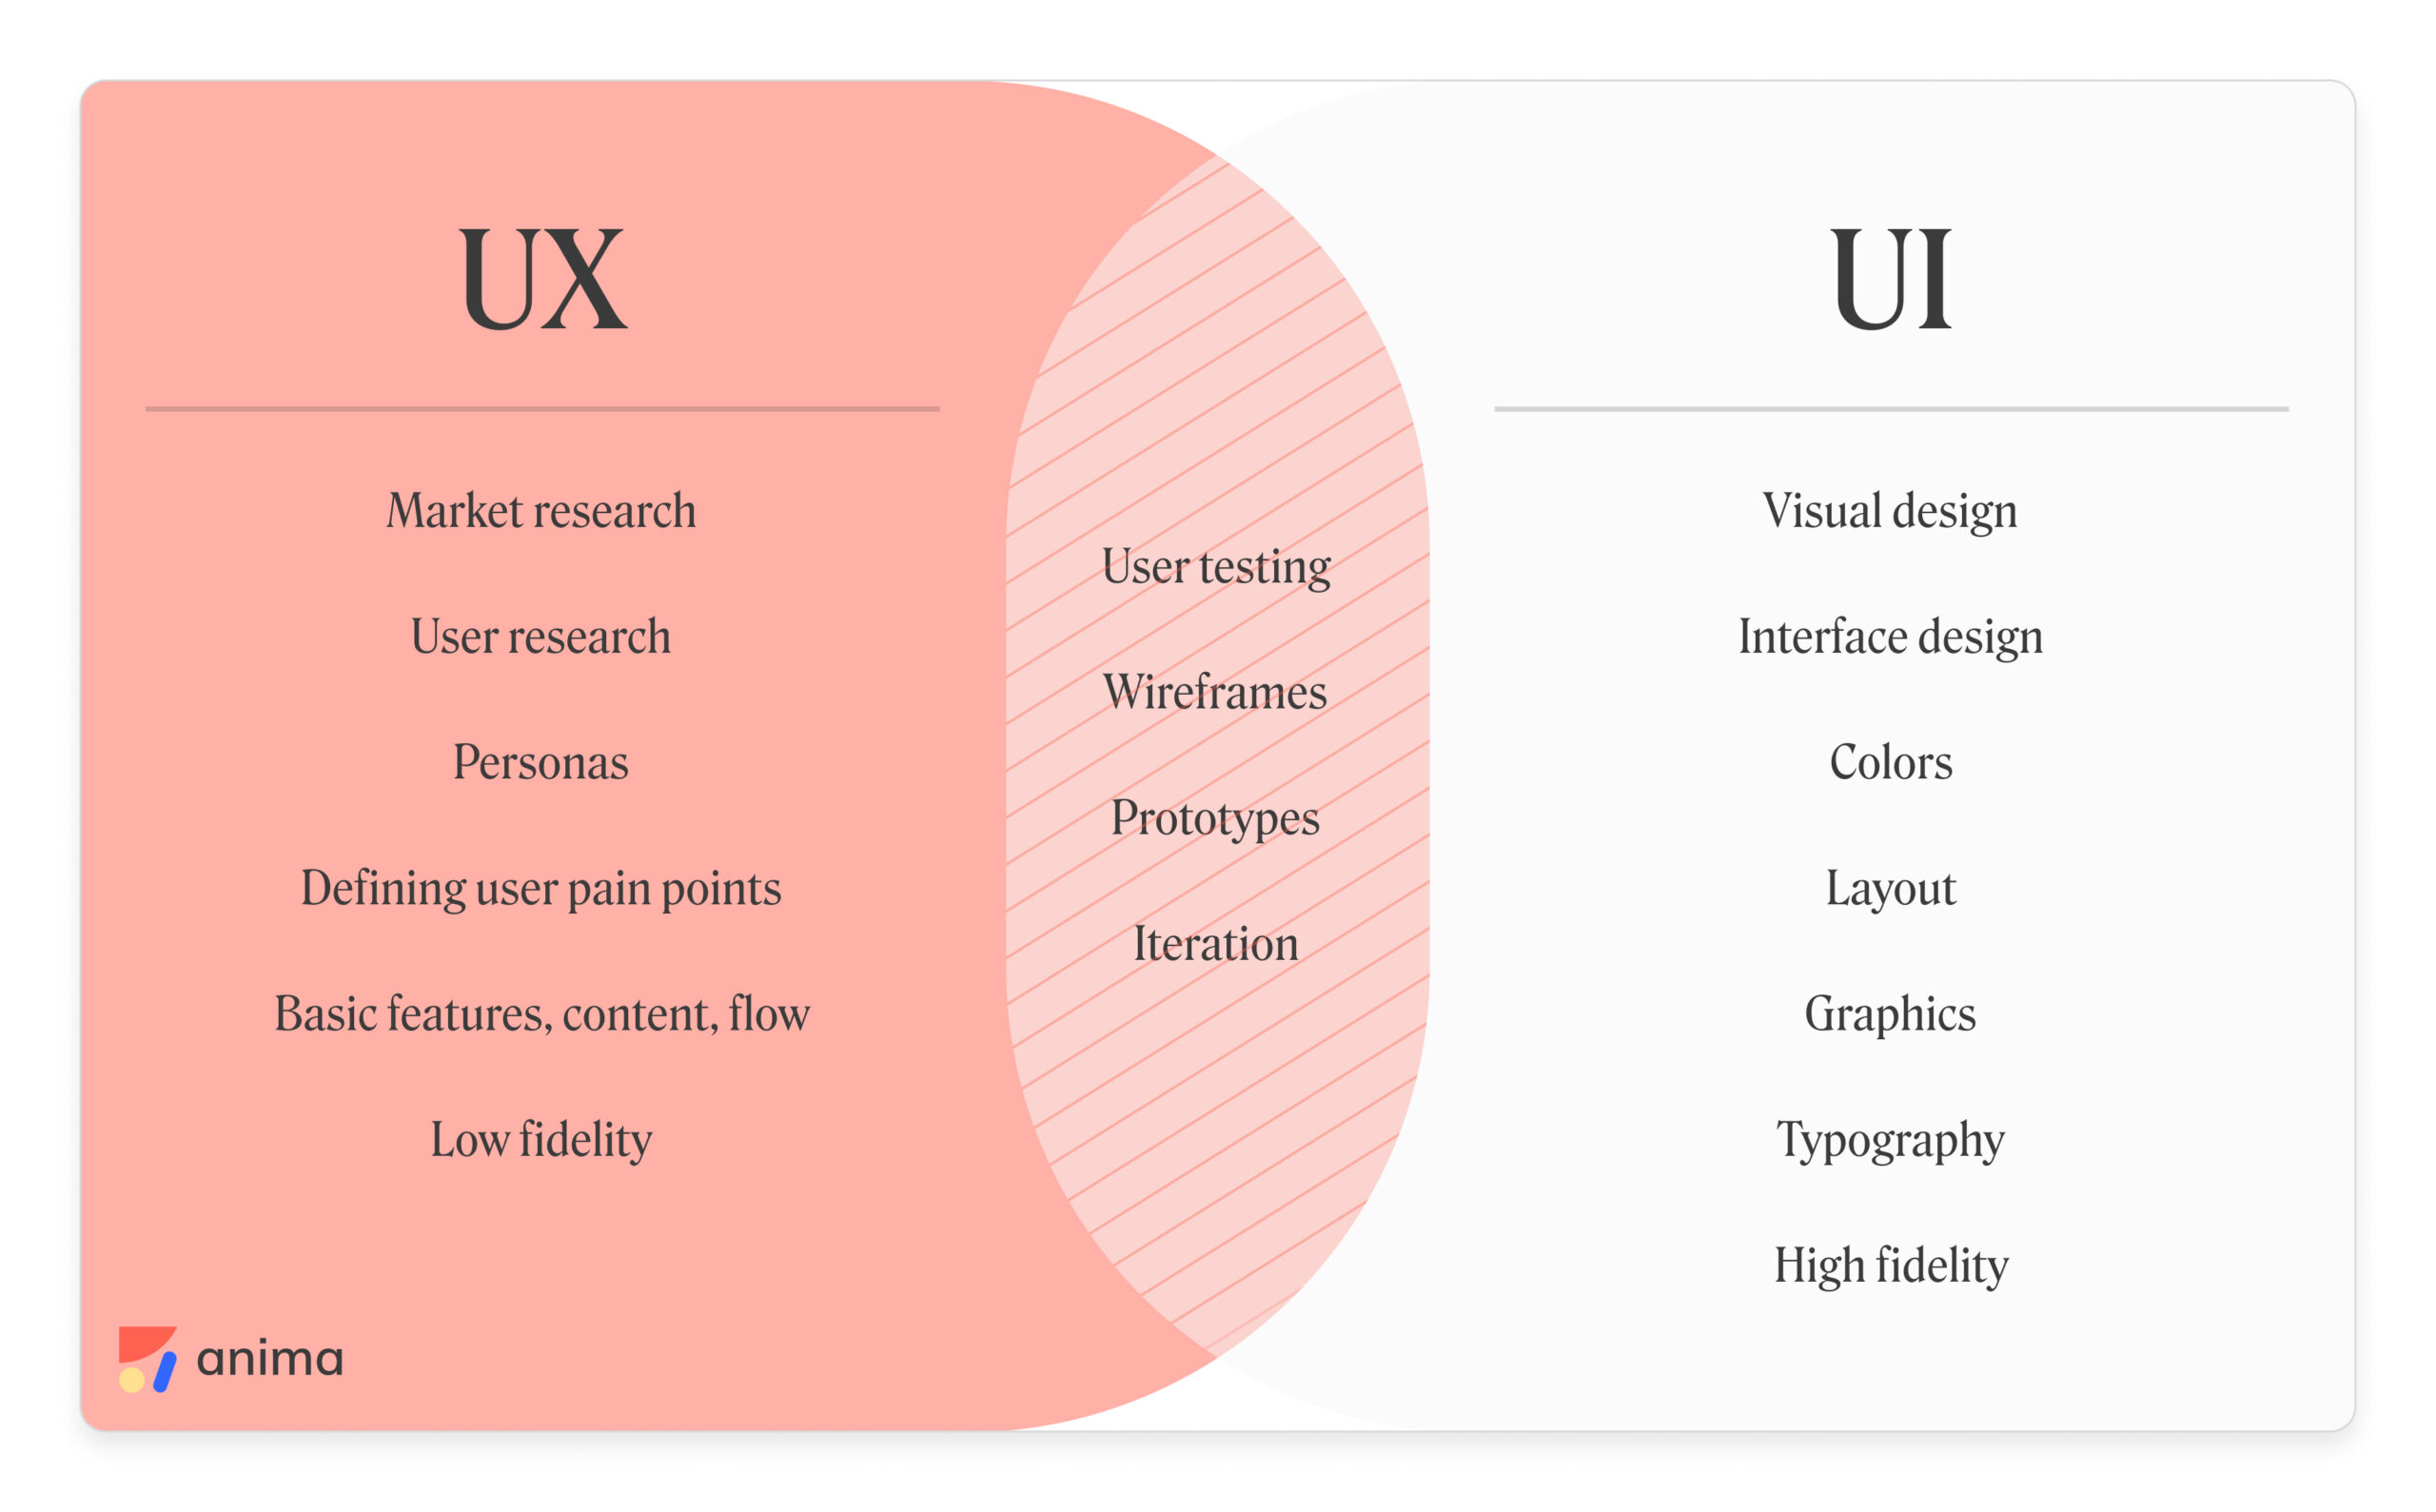 UX vs. UI - differences and overlap